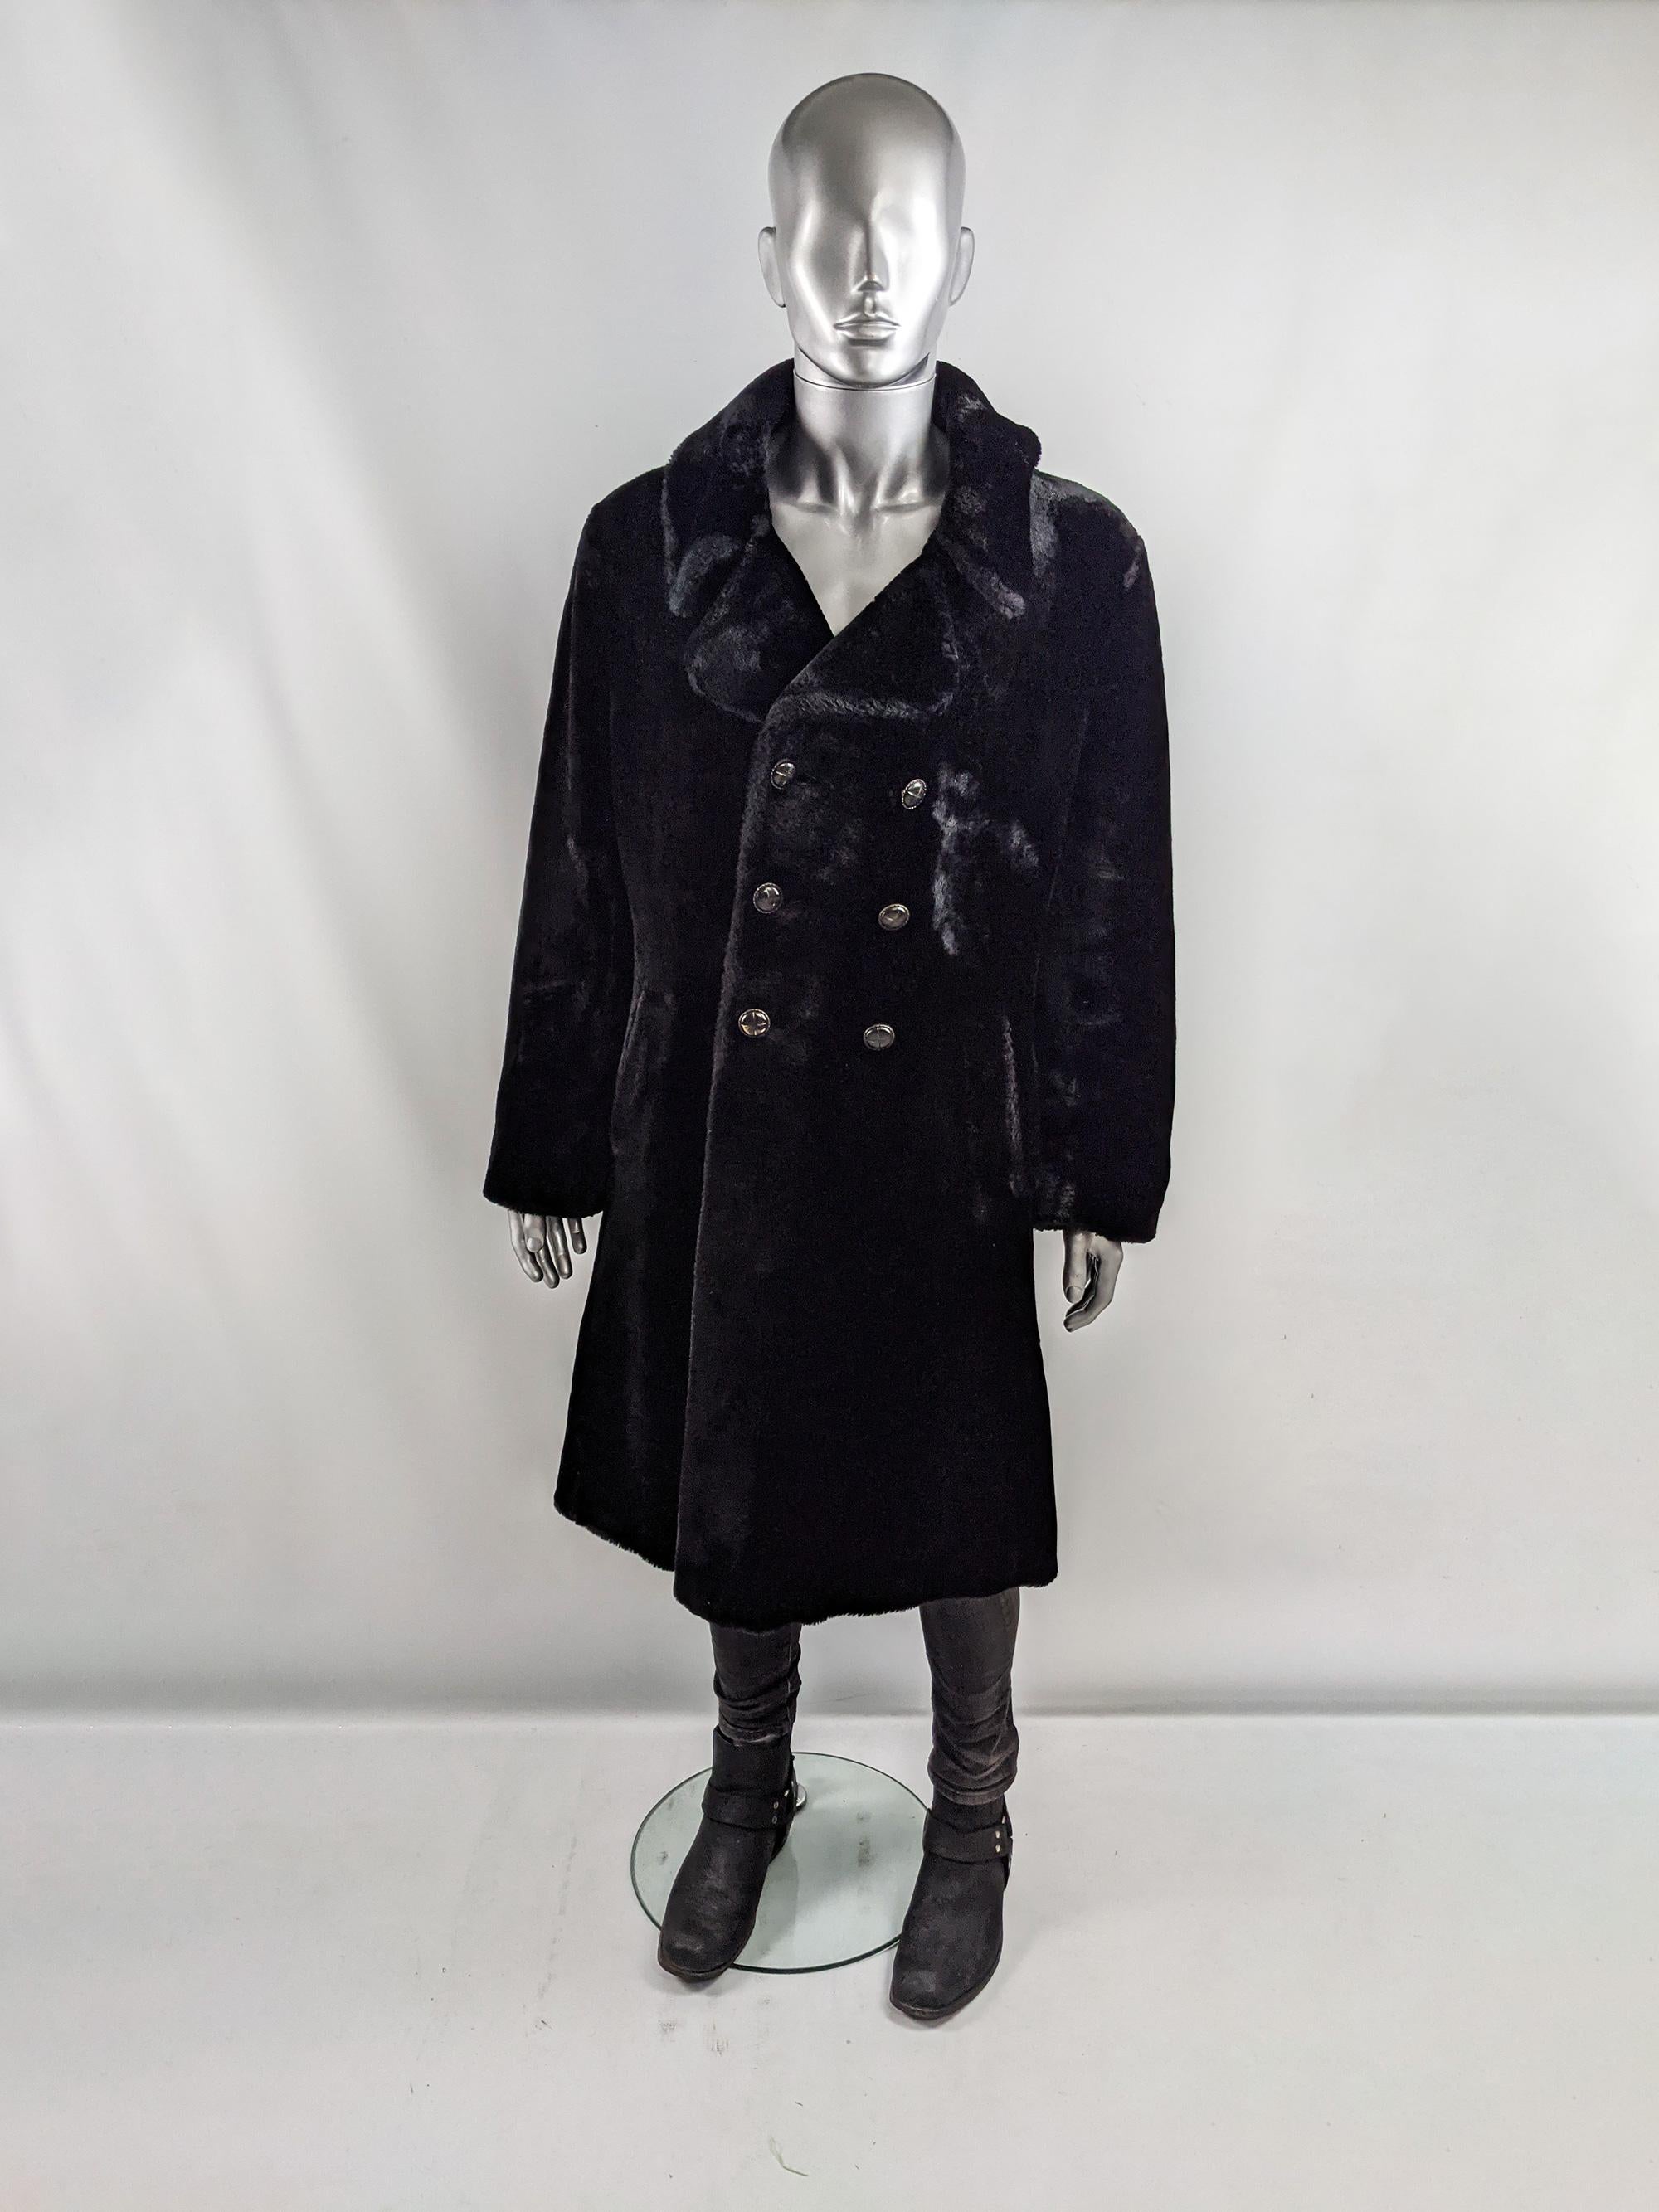 An absolutely amazing and super rare vintage gents faux fur peacoat from the 70s by British fashion label, Astraka for their menswear line, Astraman. In a soft, black fake fur, it is really hard to find original men's faux fur coats from the